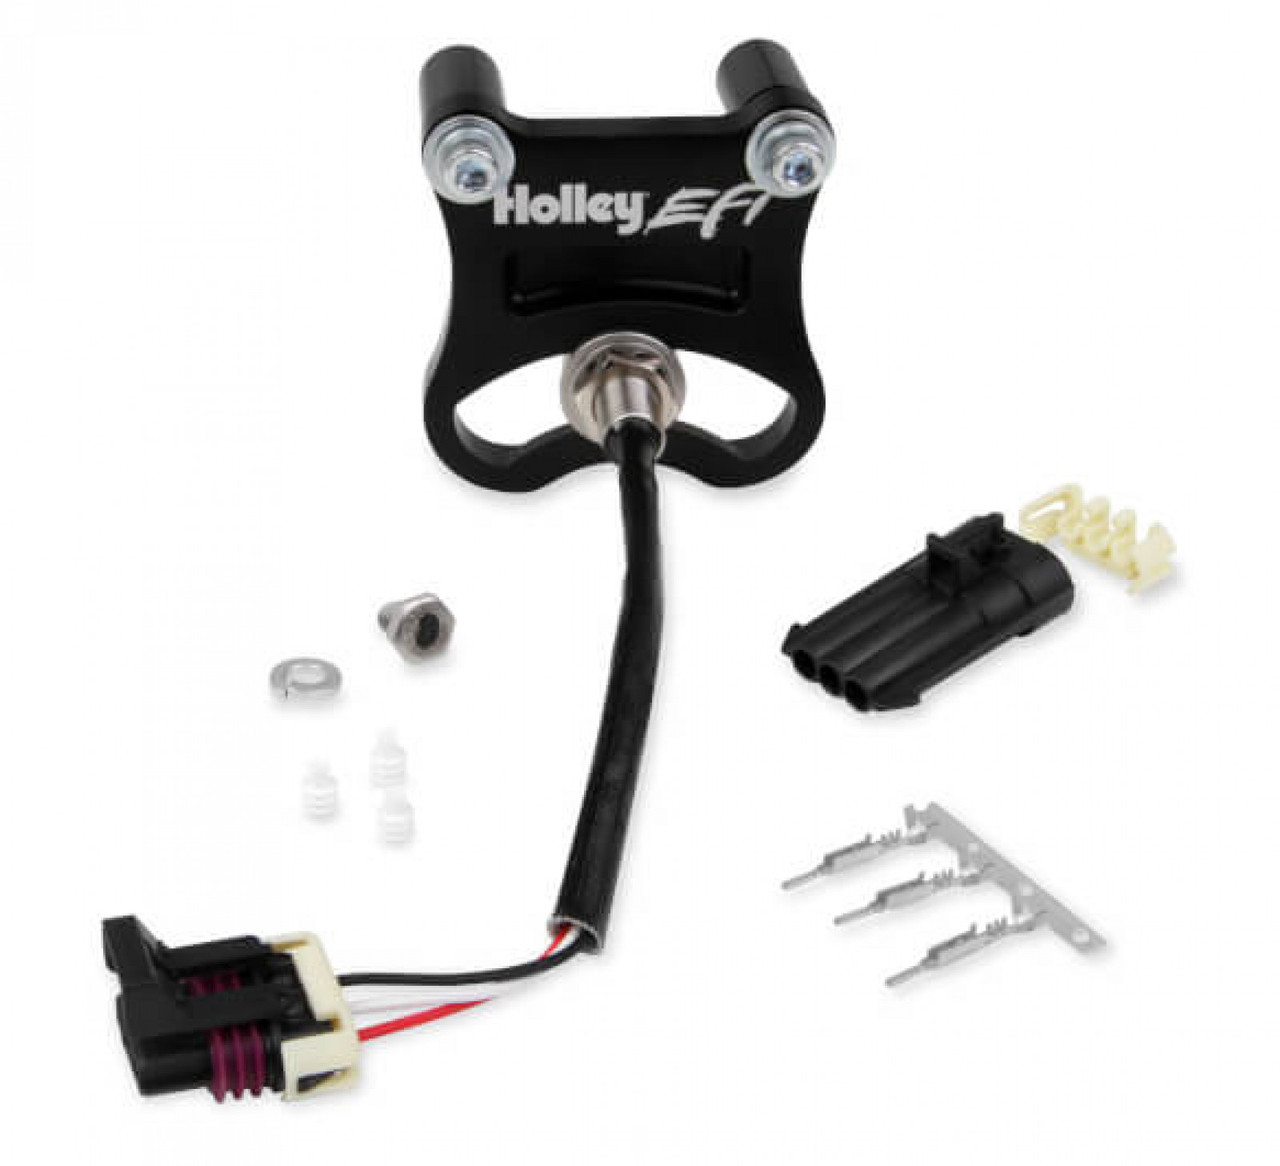 Holley EFI Universal Cam Sync Systems (HOE-2556-123)